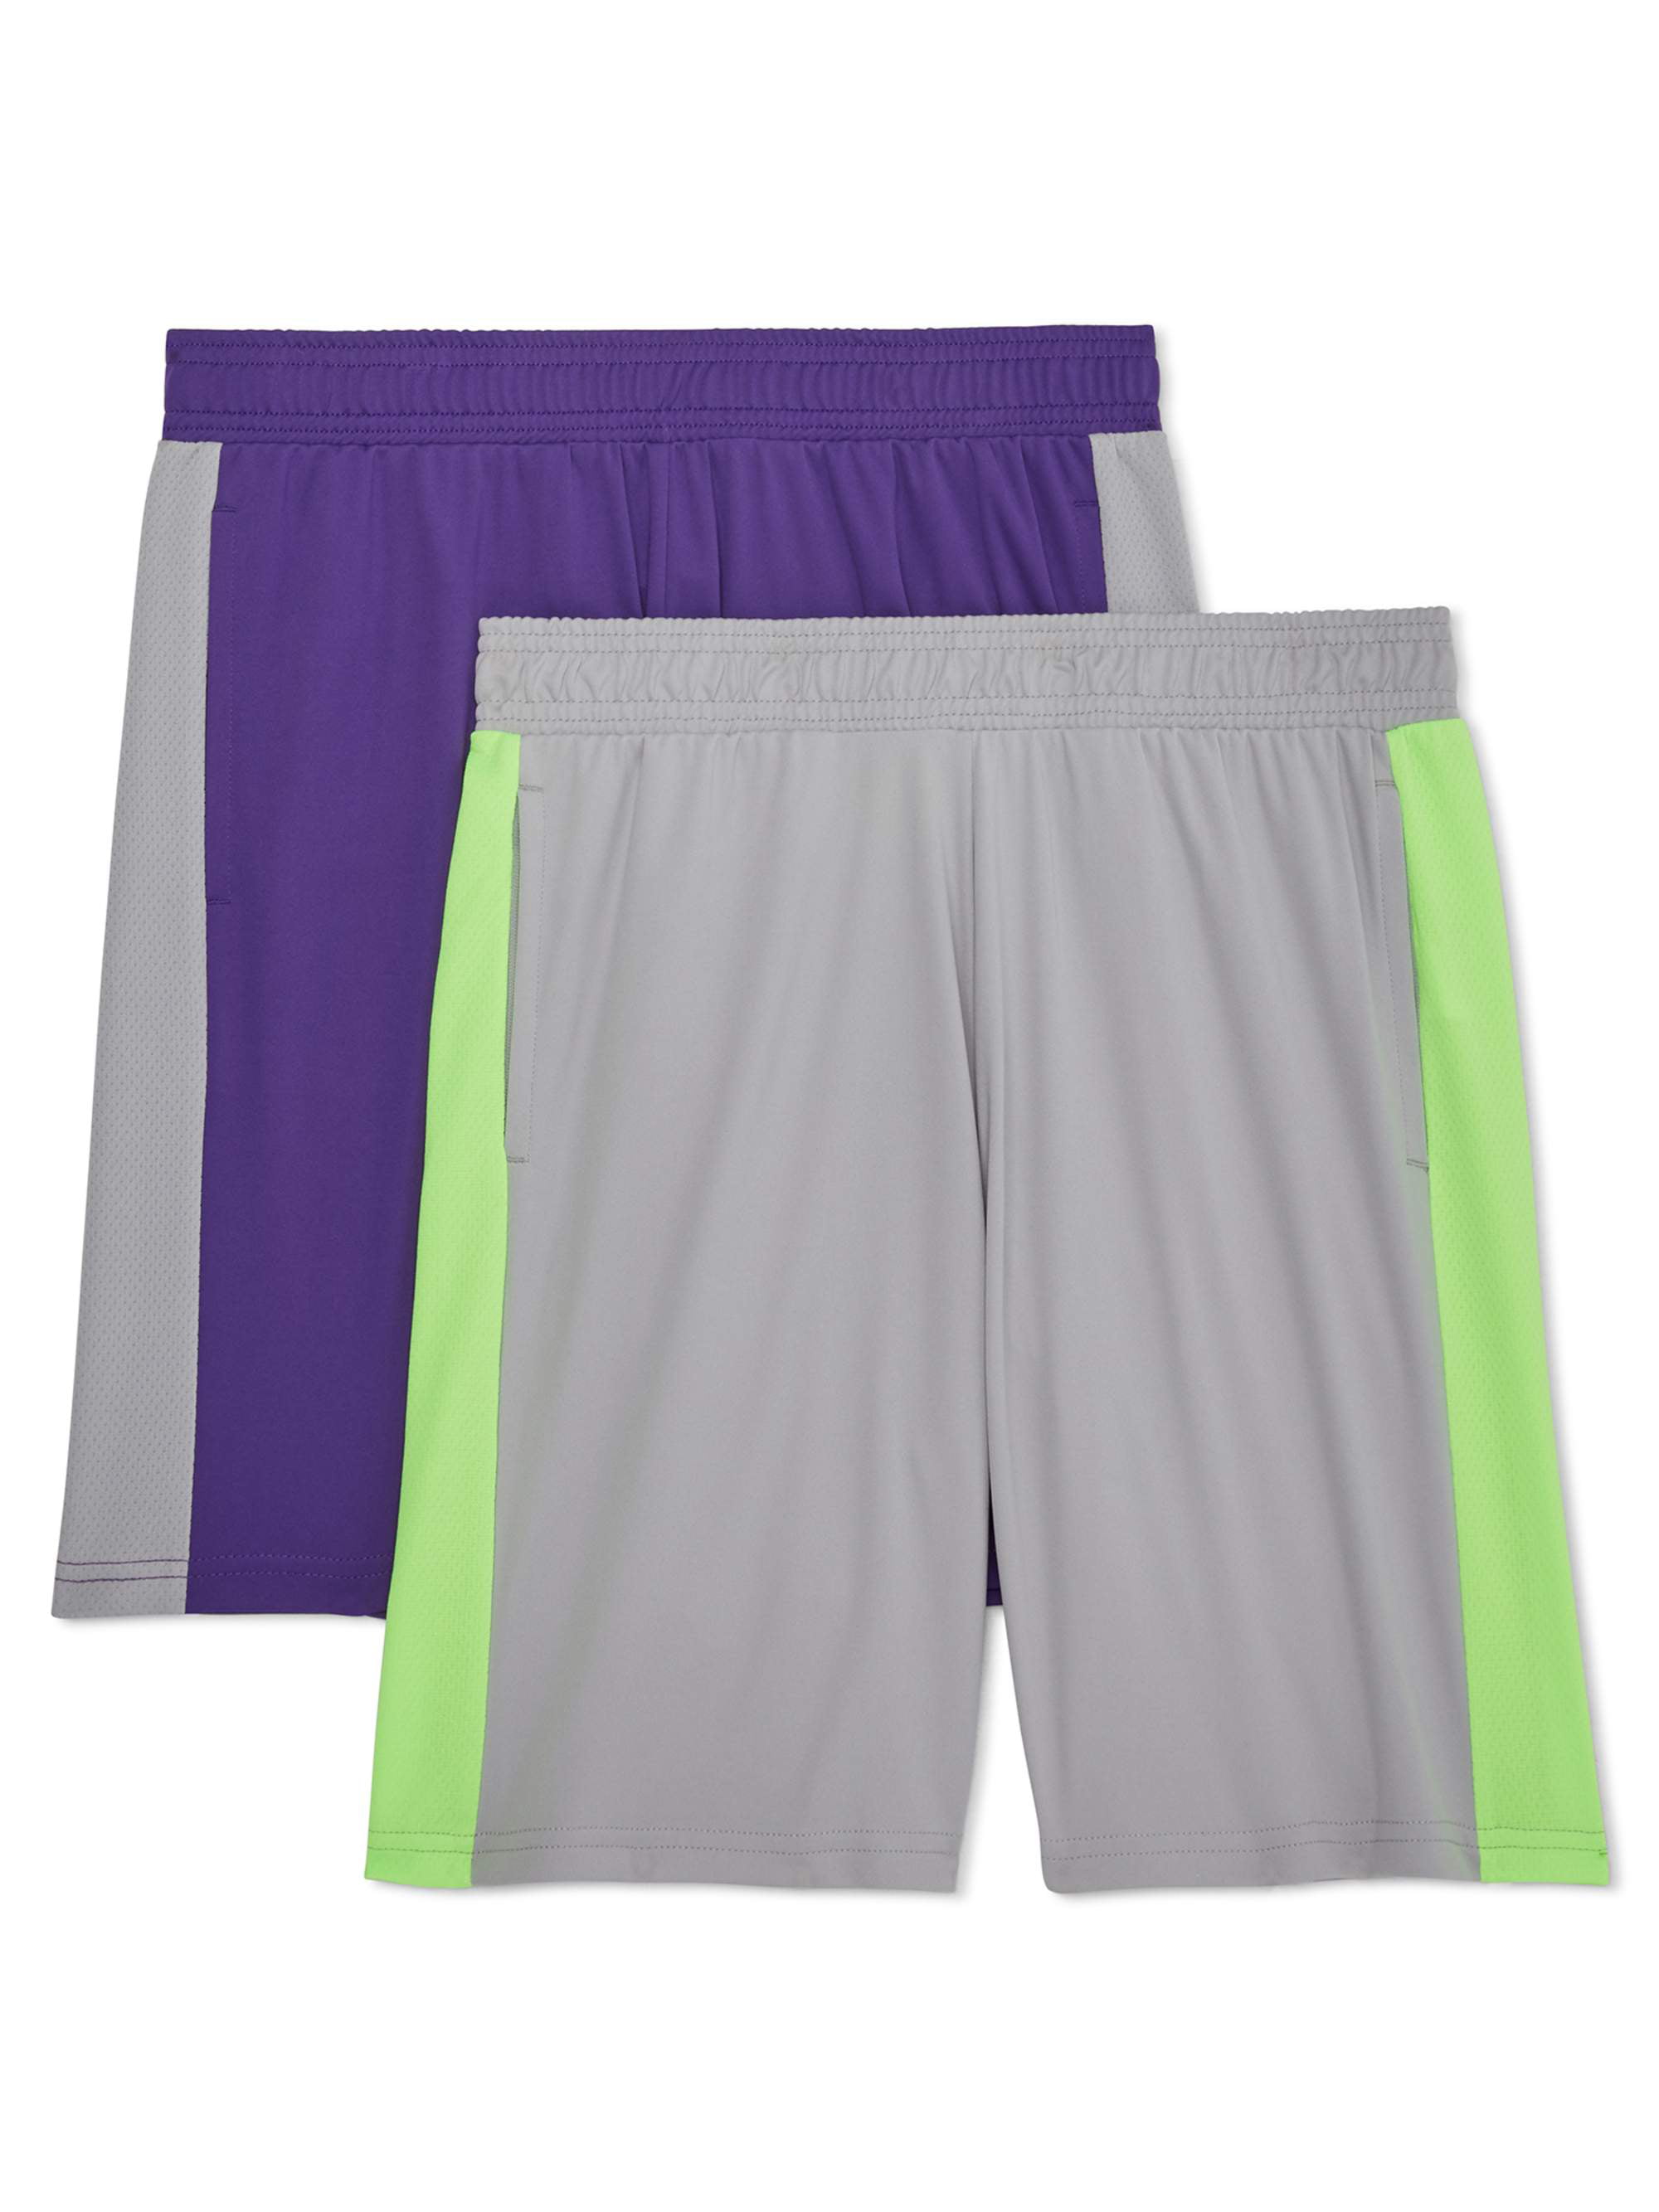 Athletic Works Boys 4-18 & Husky DriWorks Performance Core Shorts, 2 ...